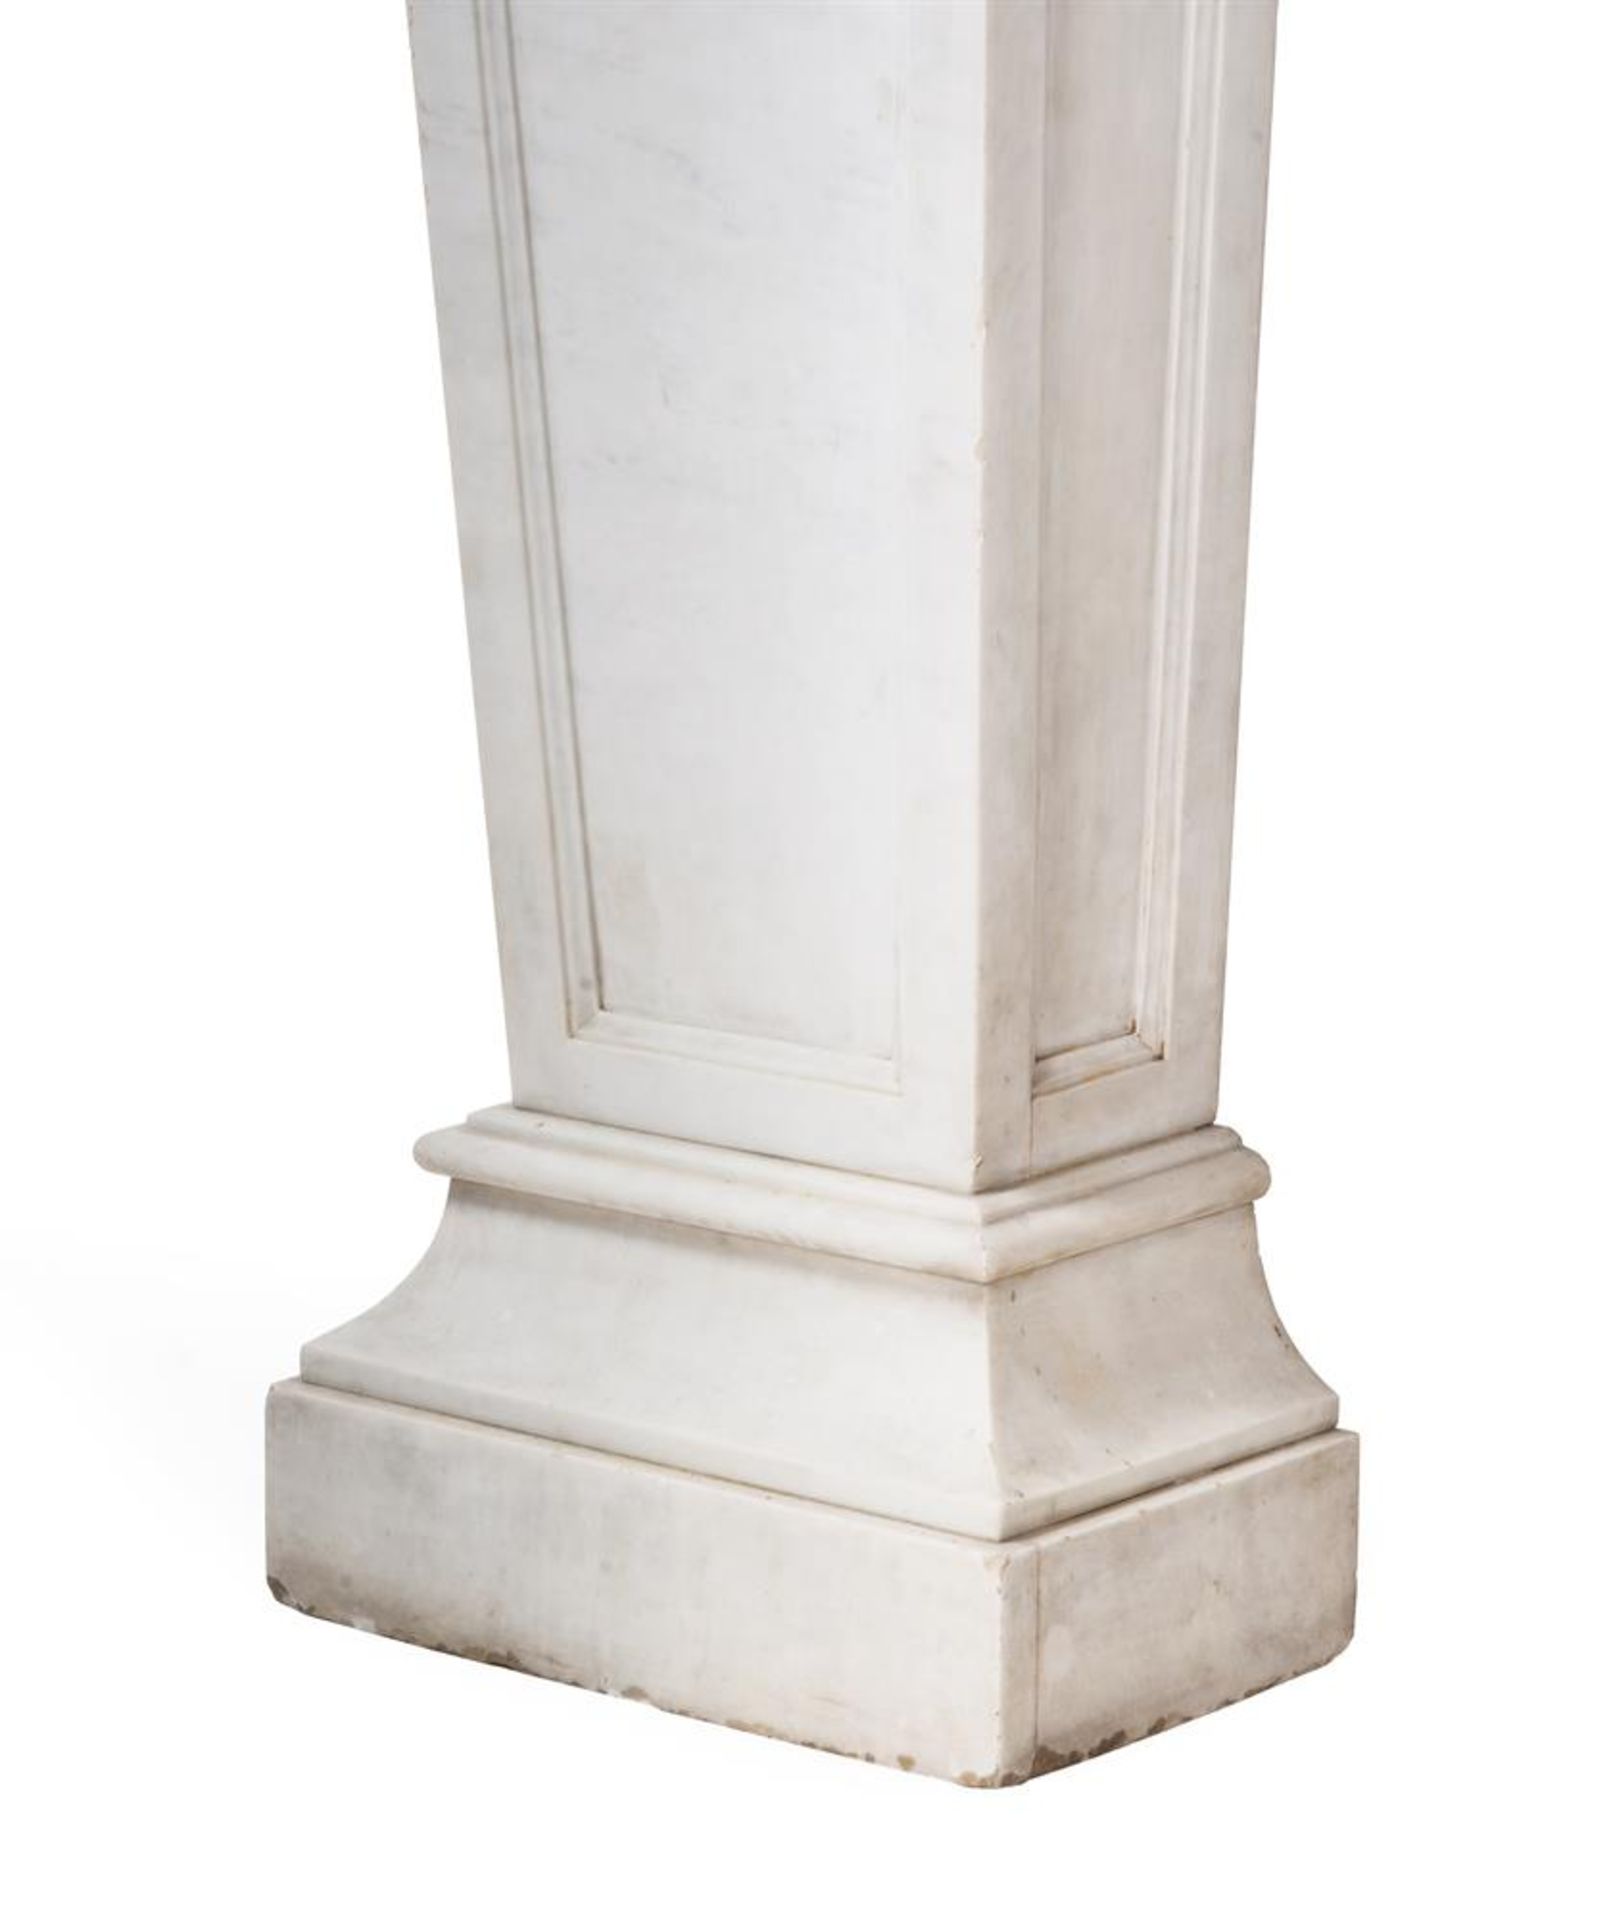 A PAIR OF CARRARA MARBLE PEDESTALS, LATE 19TH CENTURY - Image 3 of 3